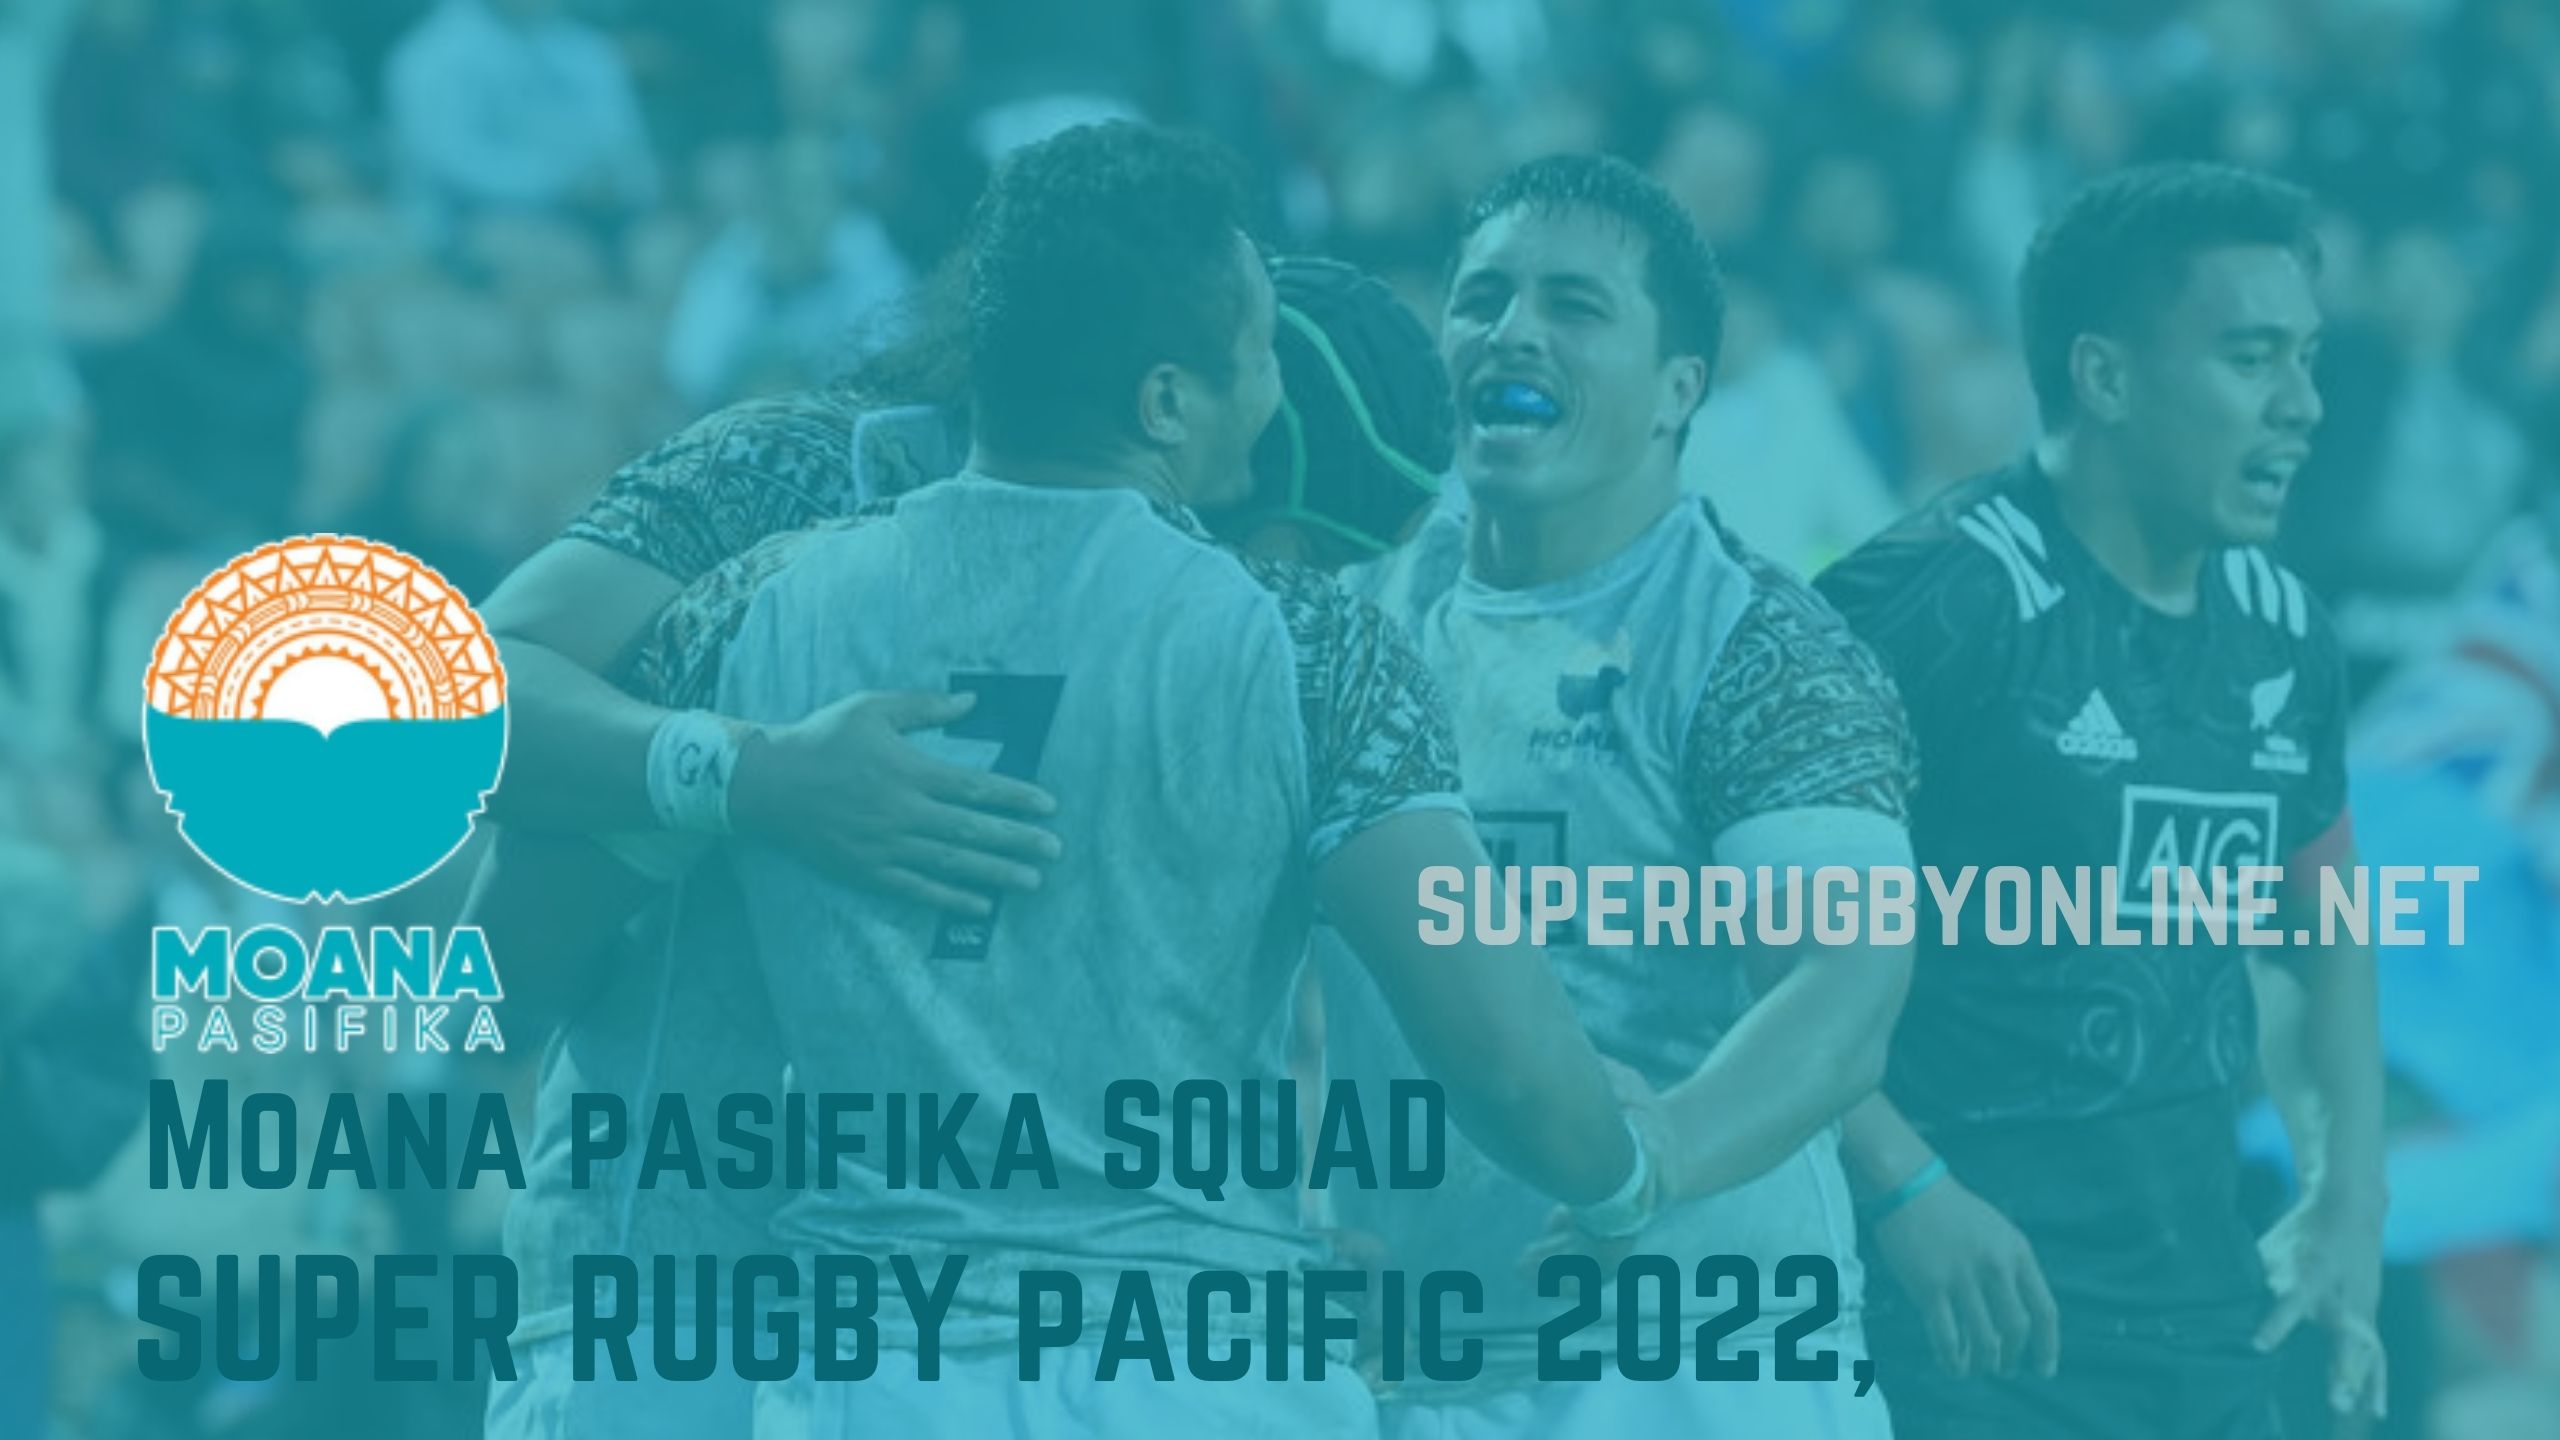 Moana Pasifika Super Rugby Pacific Squad